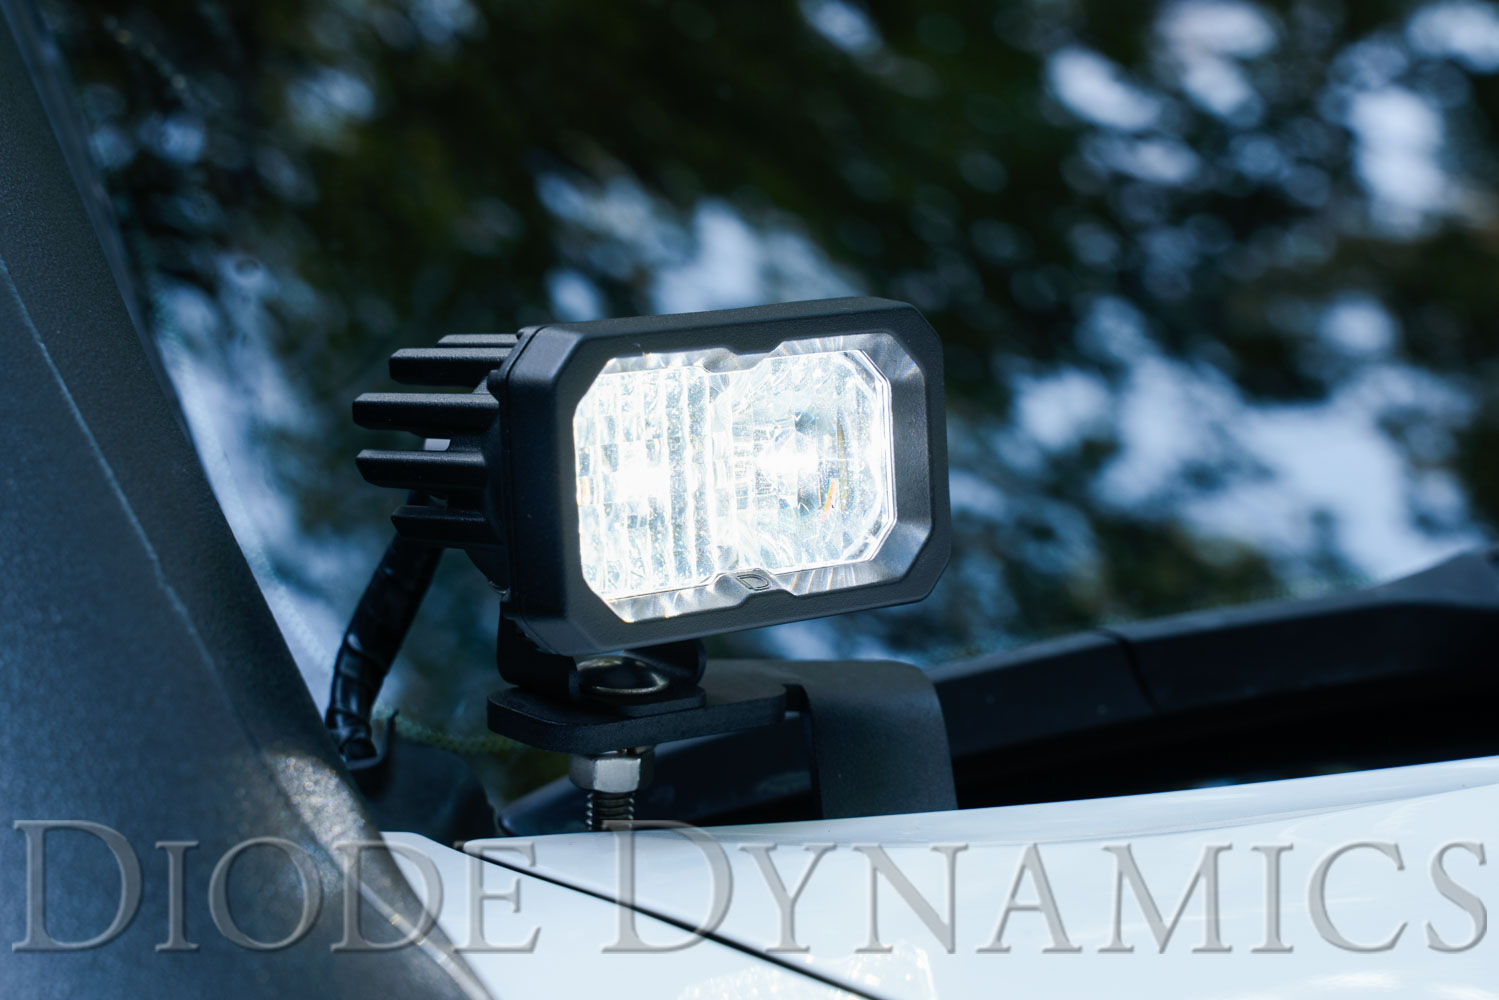 Diode Dynamics Stage Series 2 Inch LED Pod, Sport White Driving Standard WBL Each - Click Image to Close